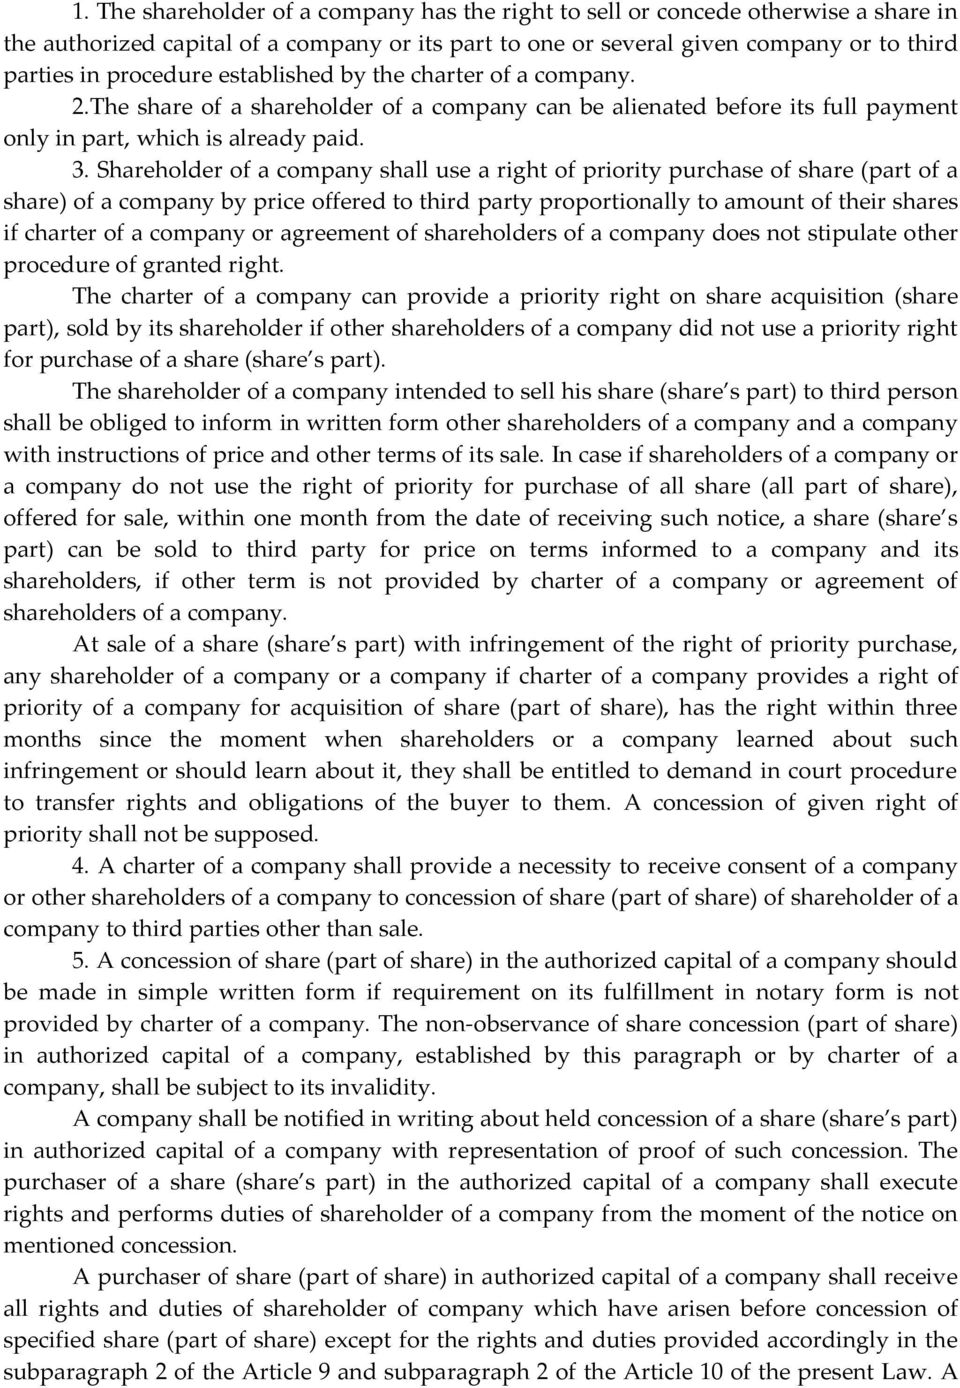 Shareholder of a company shall use a right of priority purchase of share (part of a share) of a company by price offered to third party proportionally to amount of their shares if charter of a